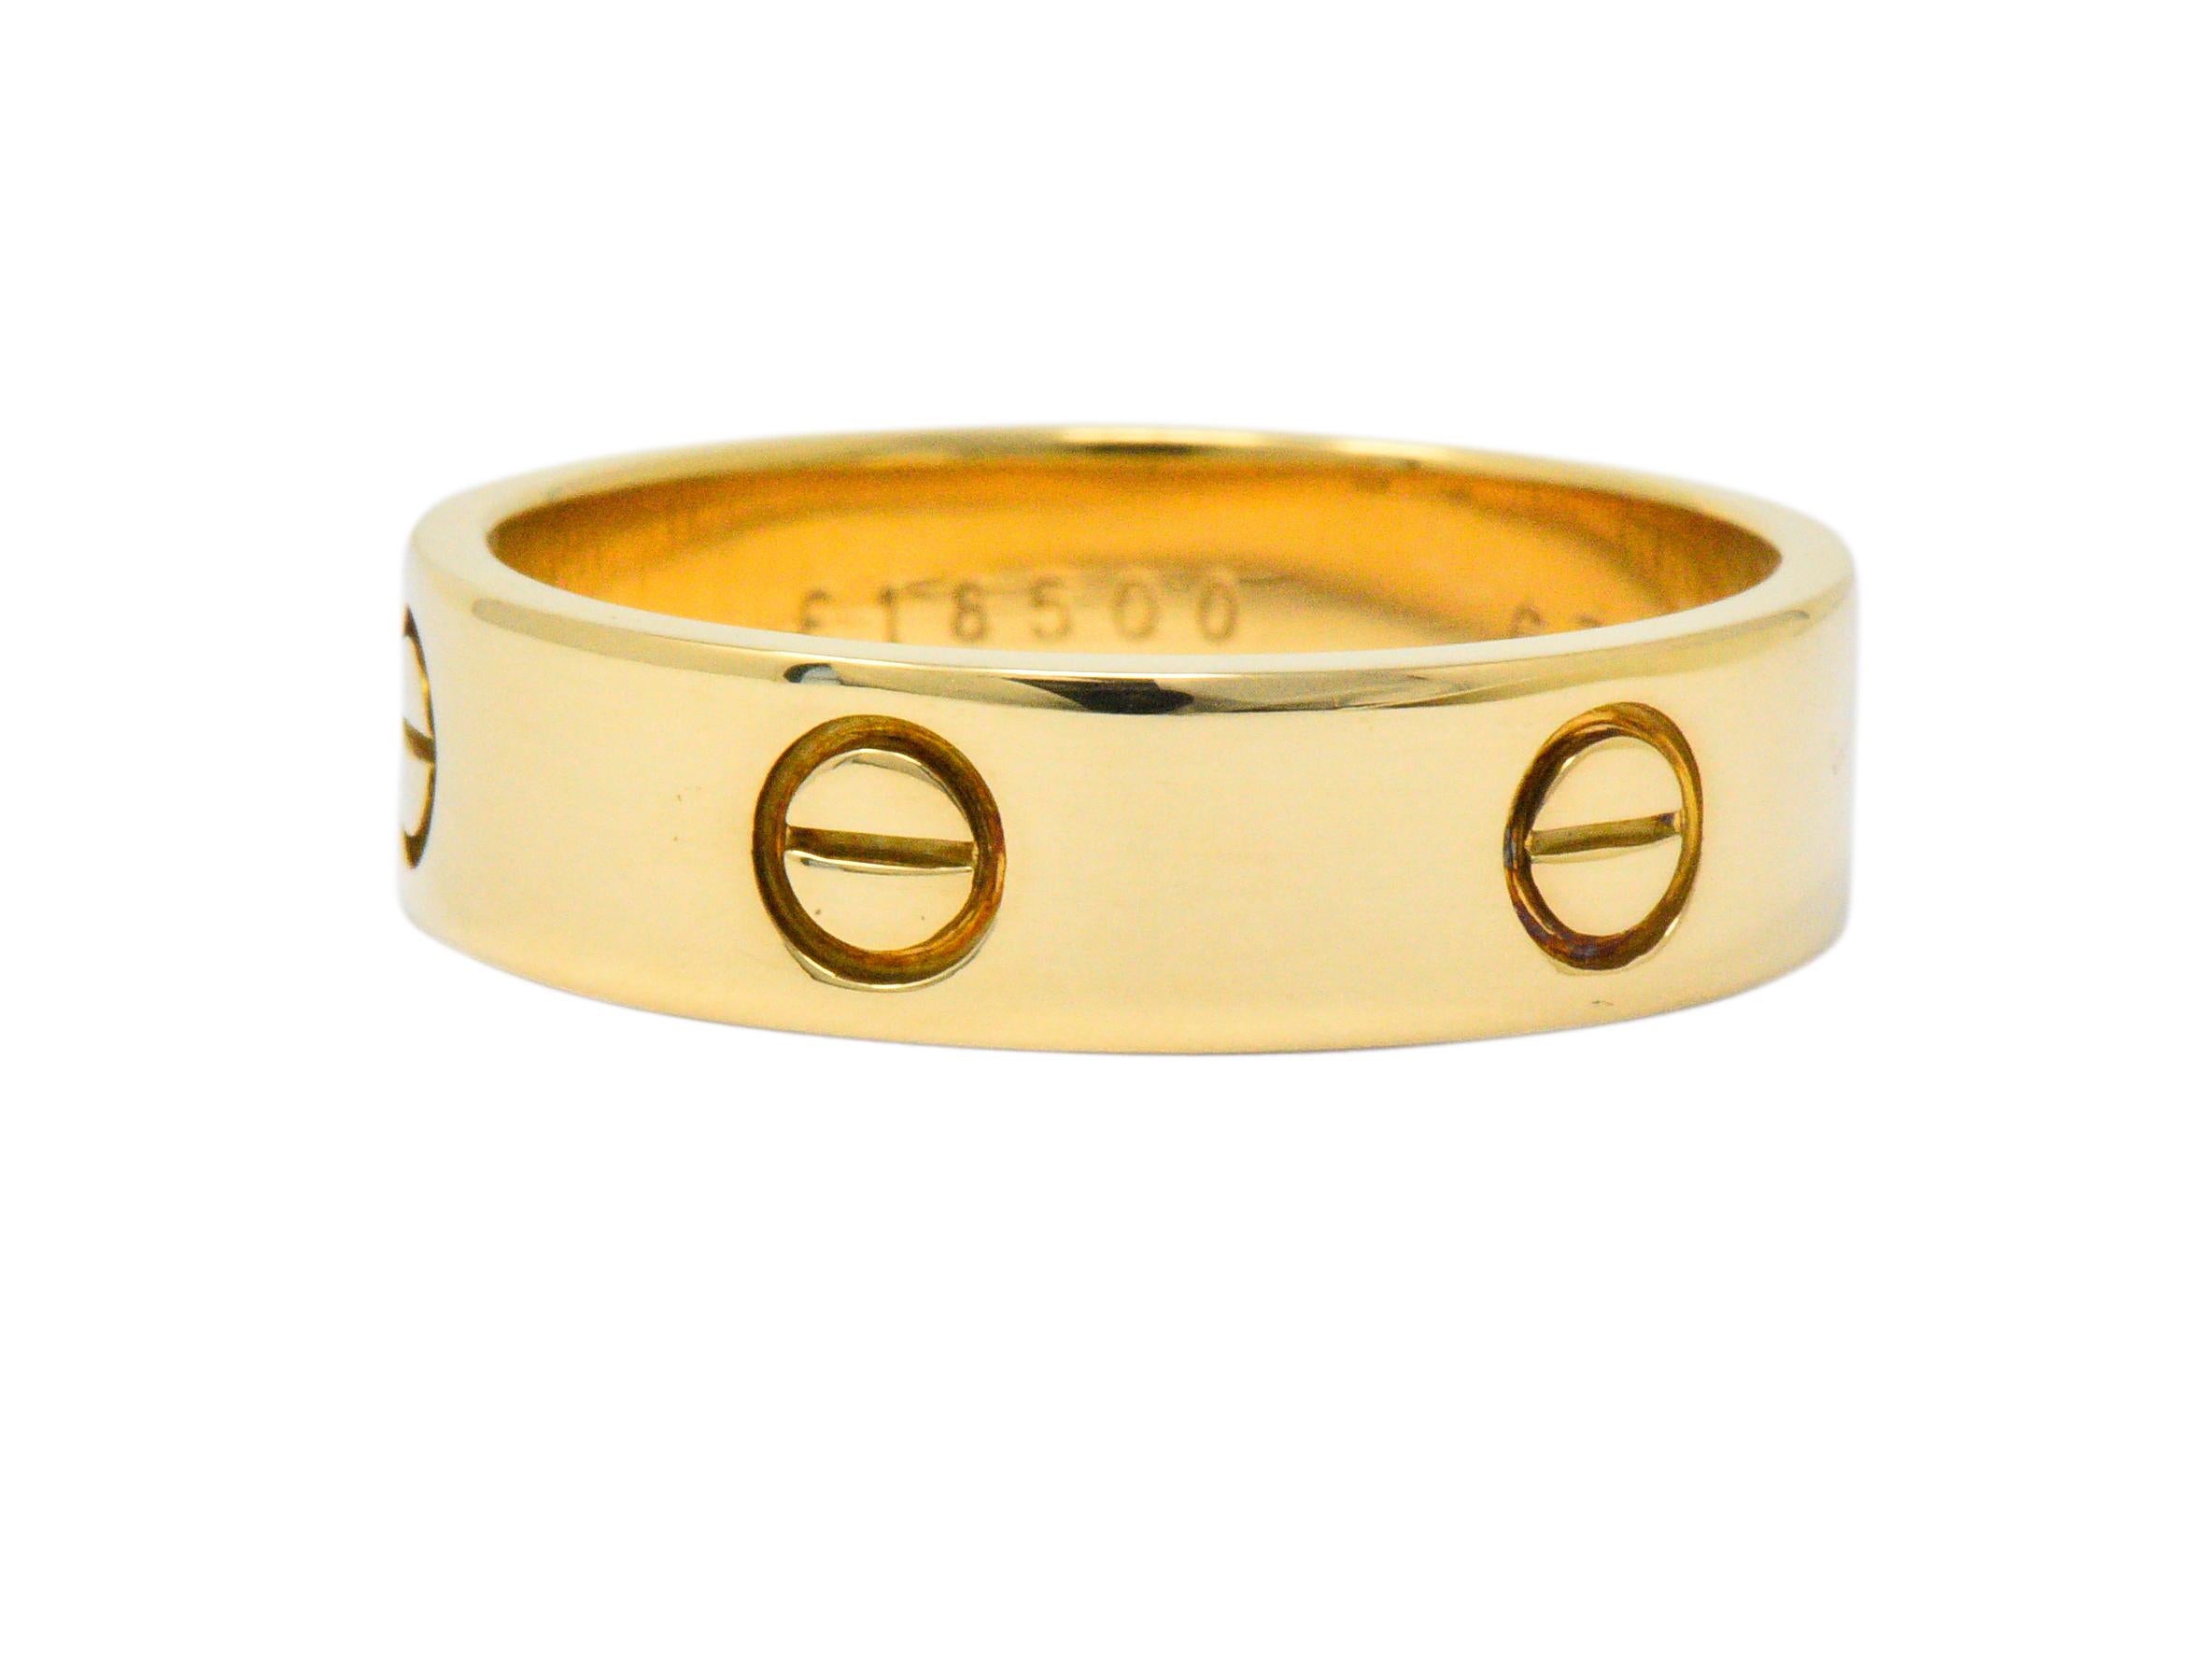 Featuring a solid gold highly polished band ring

Intermittent repeating symbol encompassing  band

From the Love Collection and circa 1990

Fully signed Cartier 750 E18500 63

Measures 6 mm wide and 1 mm thick

Total Weight: 8.2 grams

Ring Size: